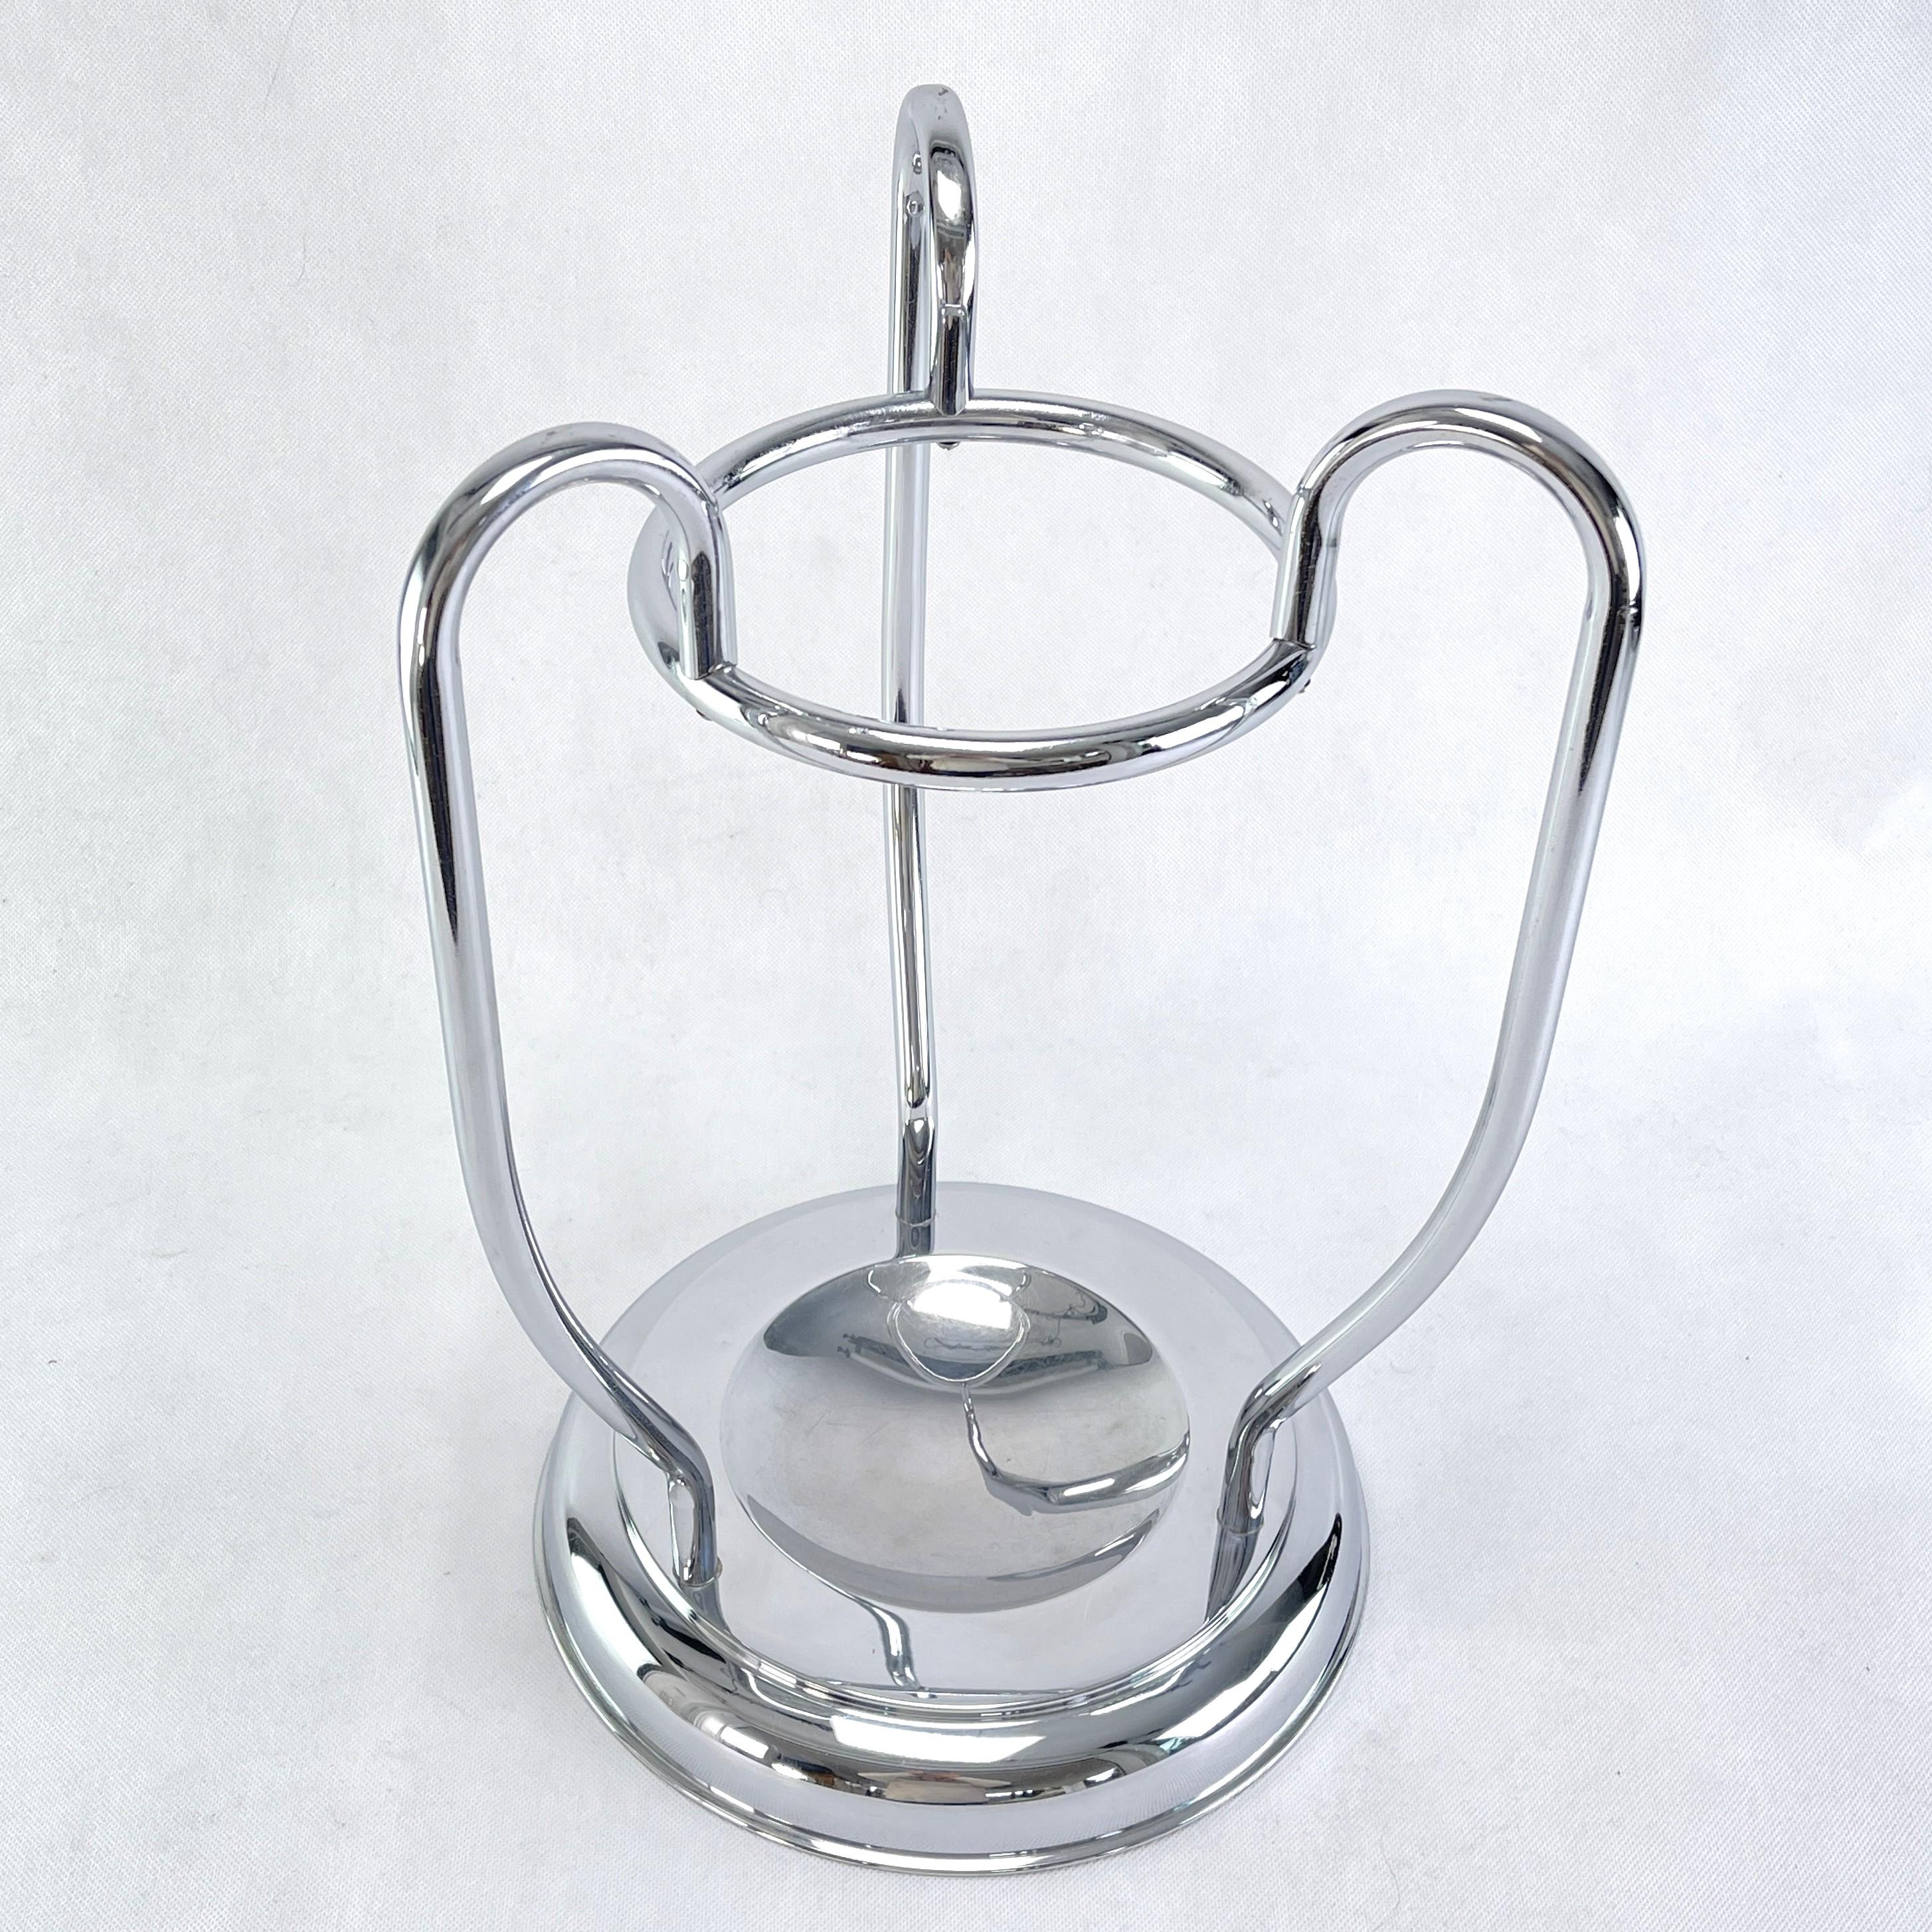 Umbrella stand - 1920s/1930s

This beautiful and rare umbrella holder from the 20s/30s is in the style of streamline modern art deco. The designer of this extraordinary object has succeeded in combining functionality, design, style and aesthetics.